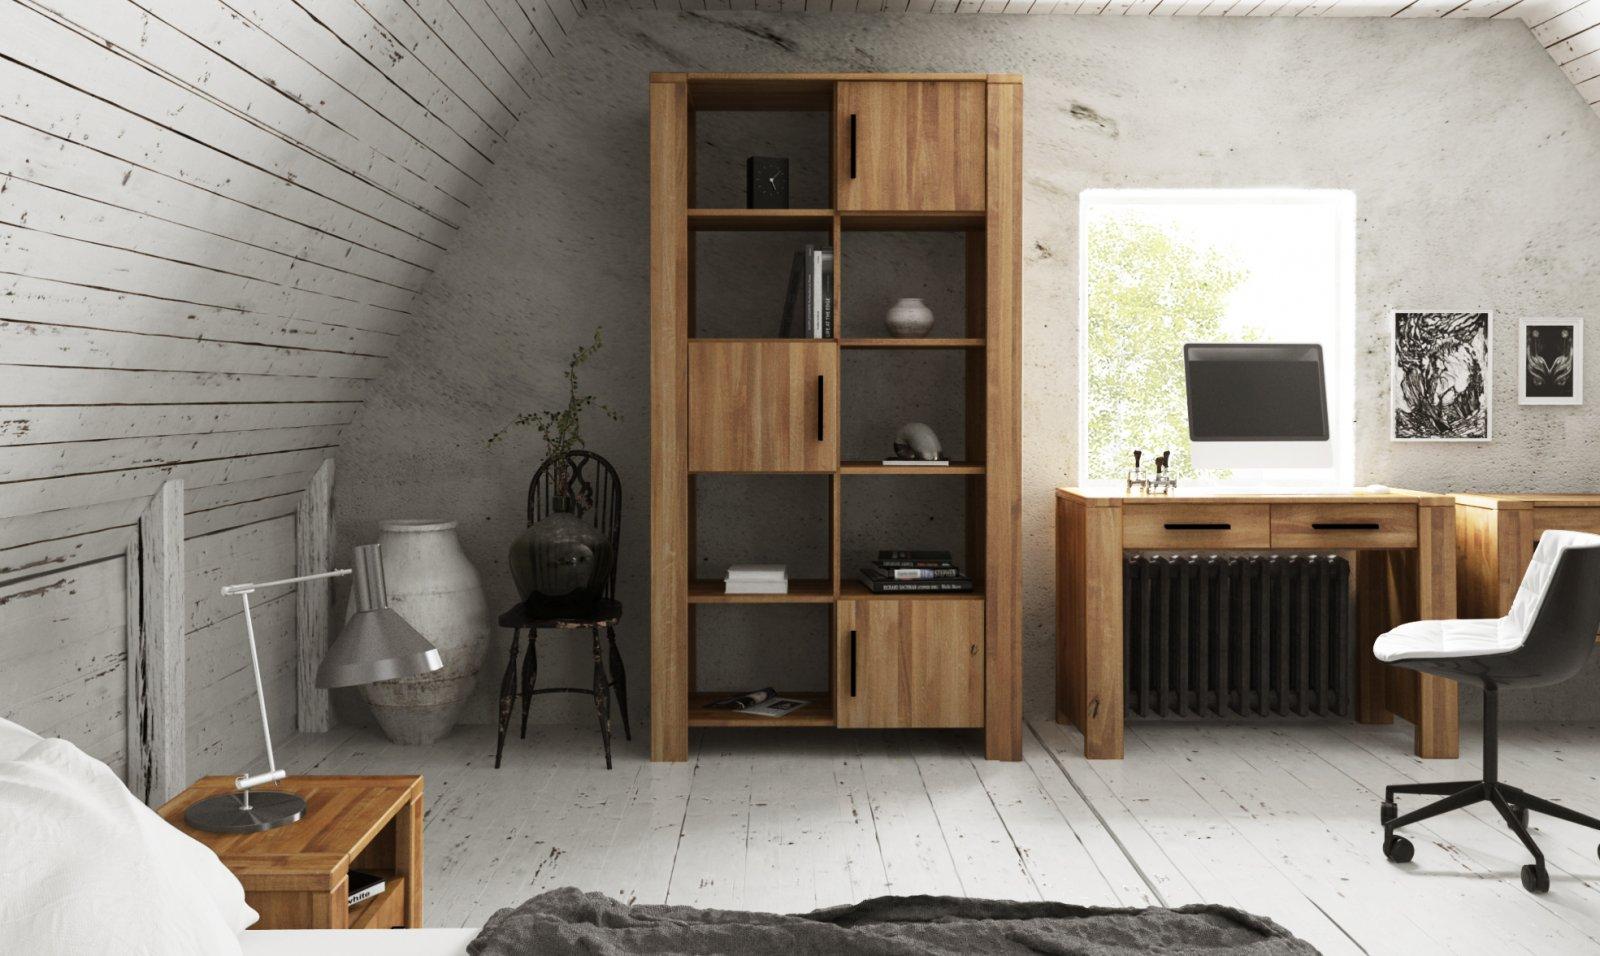 Wide bookcase CUBIC